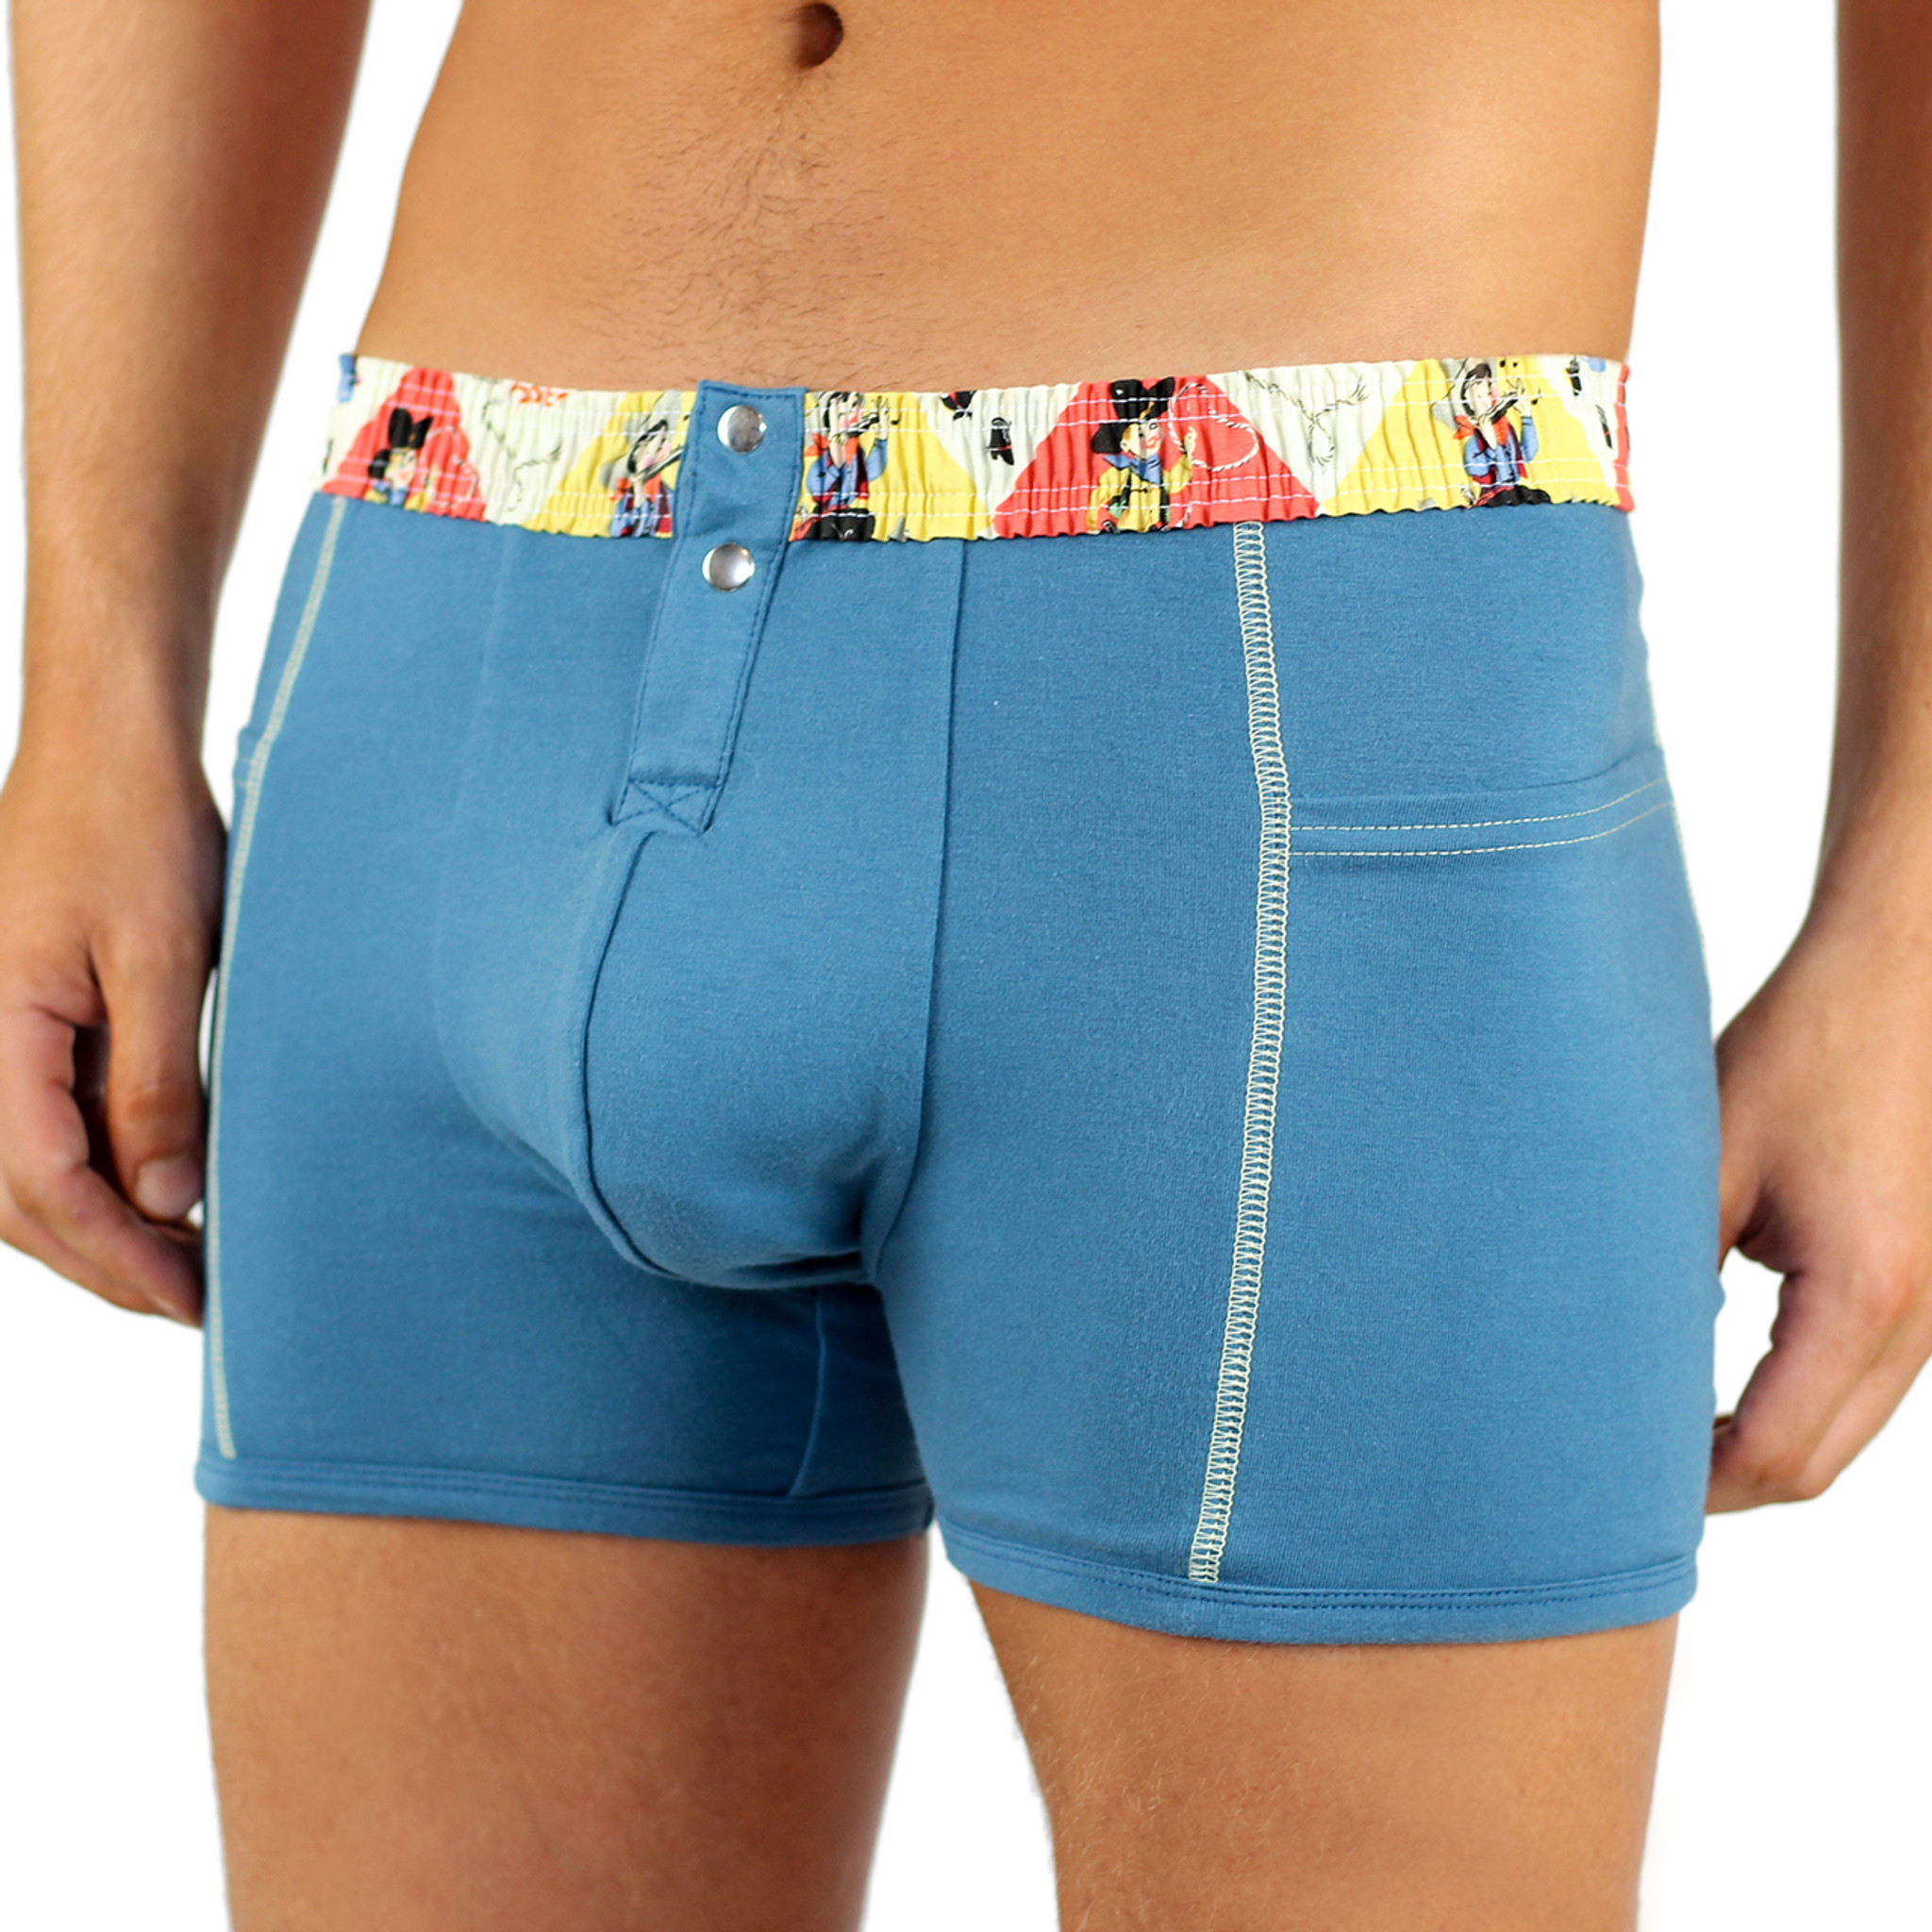 Men's Cowboy Blue Boxer Brief with Fun Rodeo Print Waistband | Foxers